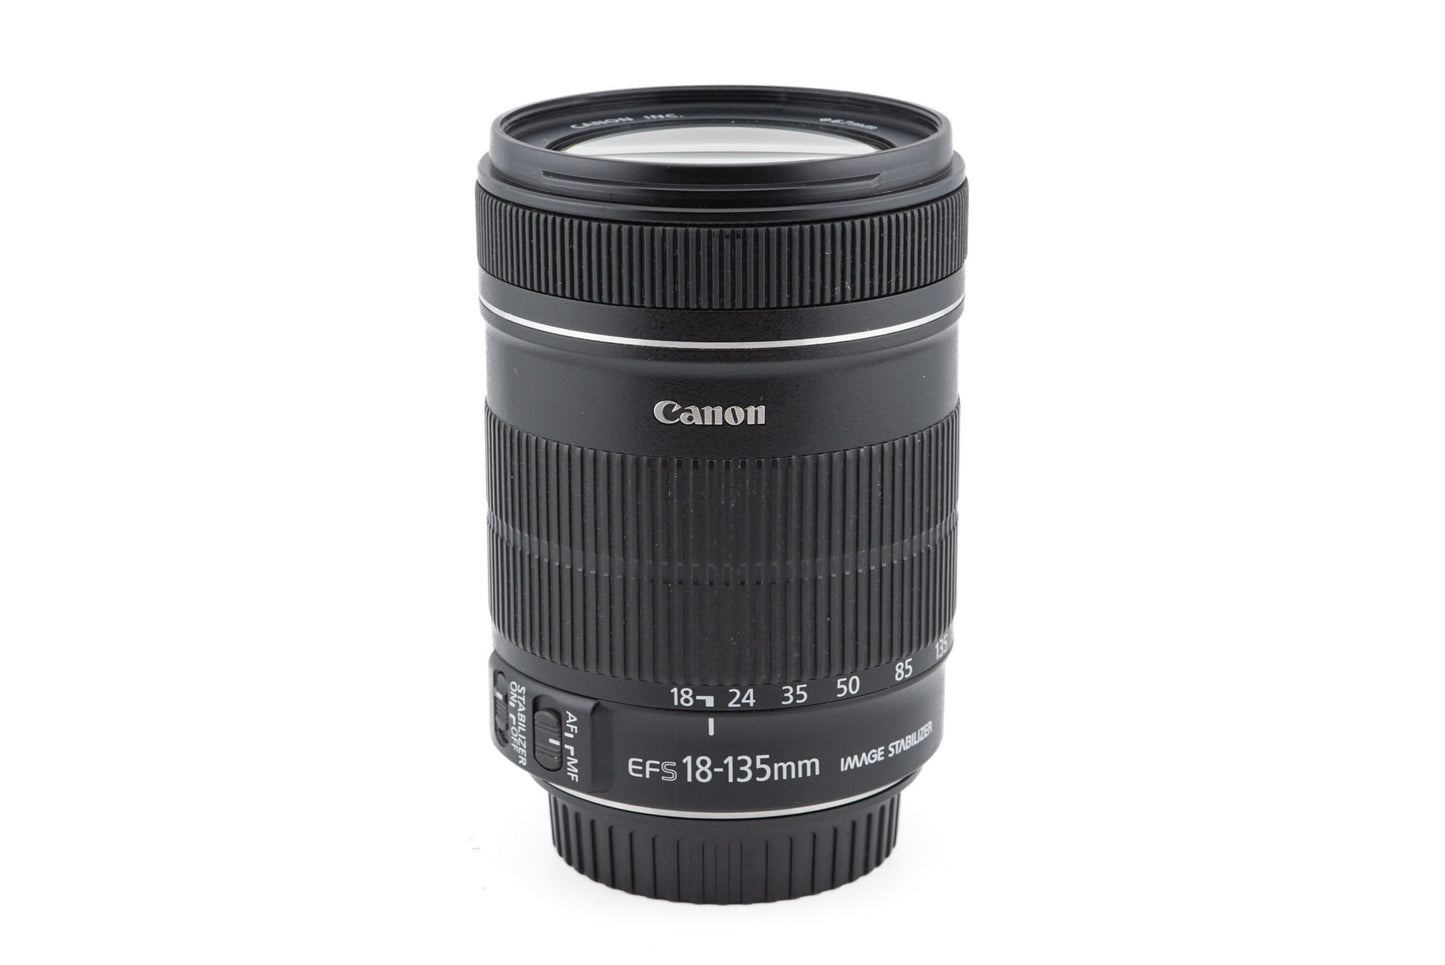 Canon 18-135mm f3.5-5.6 IS USM - Lens